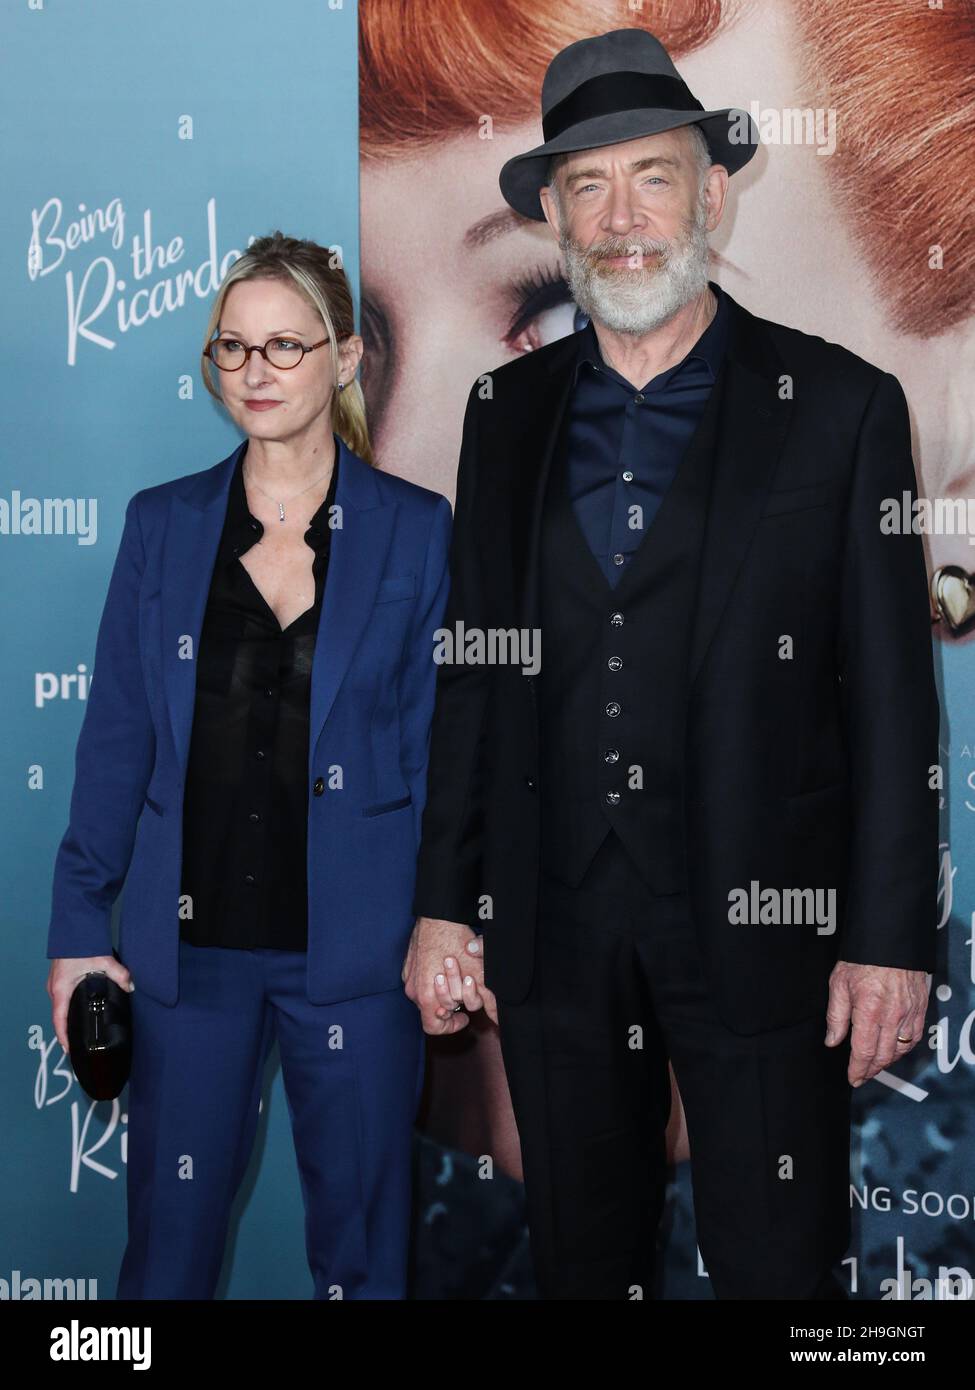 LOS ANGELES, CALIFORNIA, USA - DECEMBER 06: Actress Michelle Schumacher and  husband/actor J.K. Simmons arrive at the Los Angeles Premiere Of Amazon  Studios' 'Being The Ricardos' held at the Academy Museum of